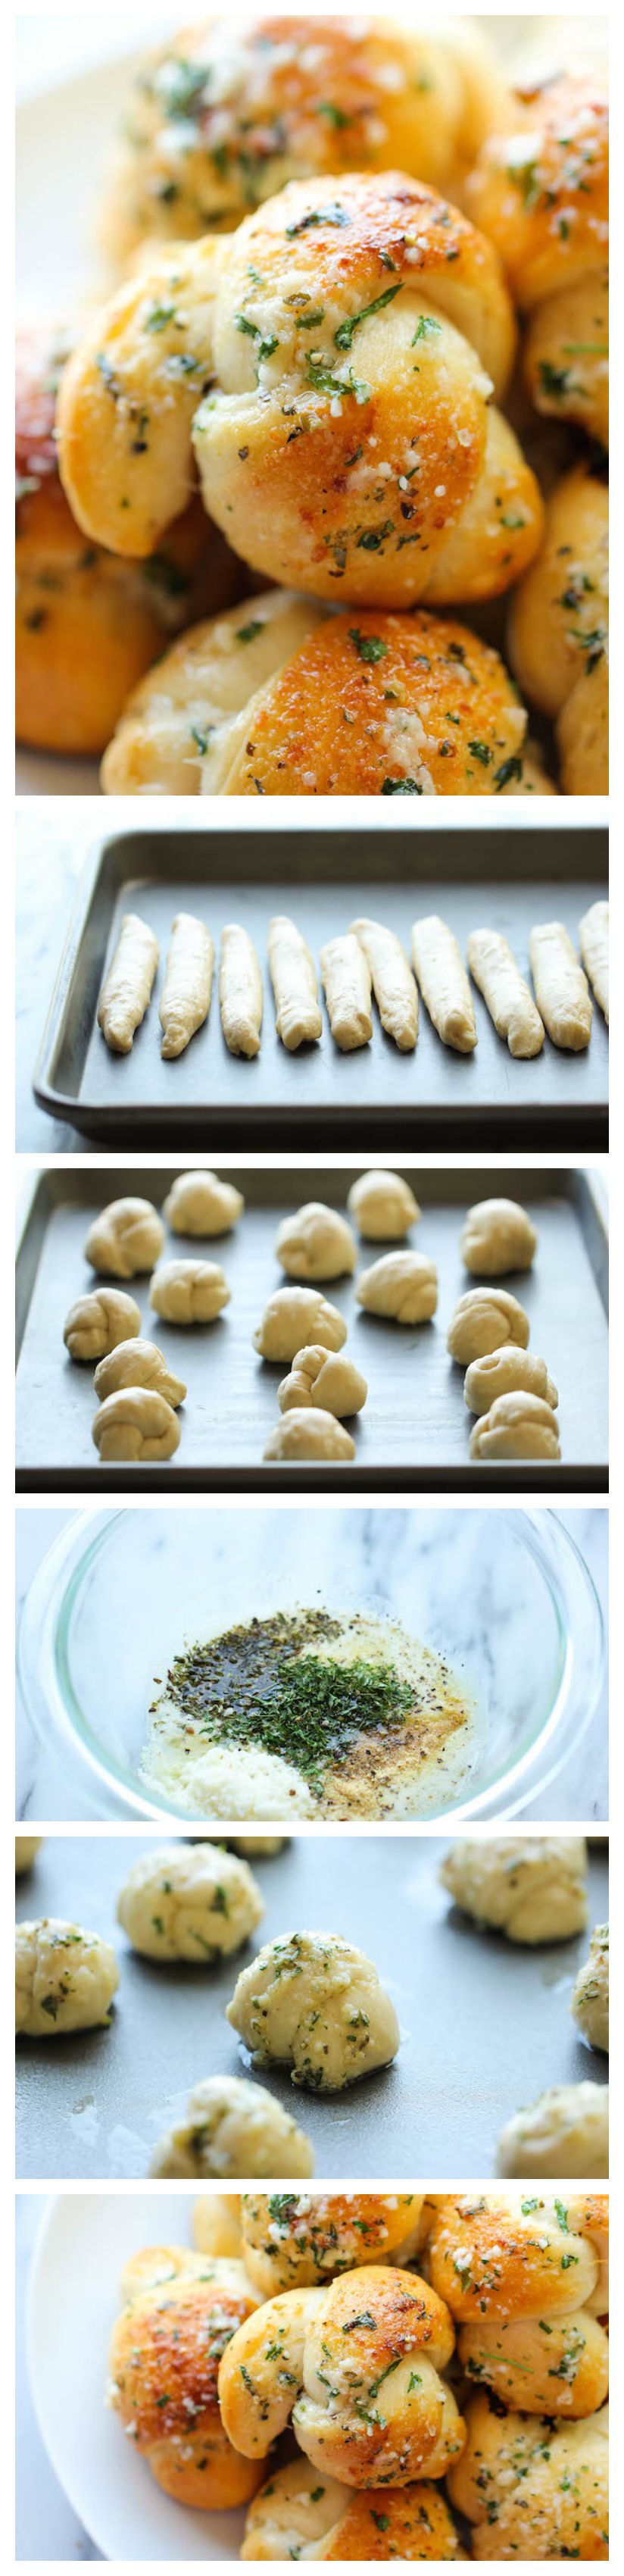 Easy Garlic Parmesan Knots from @Michele Morales Howard Delicious